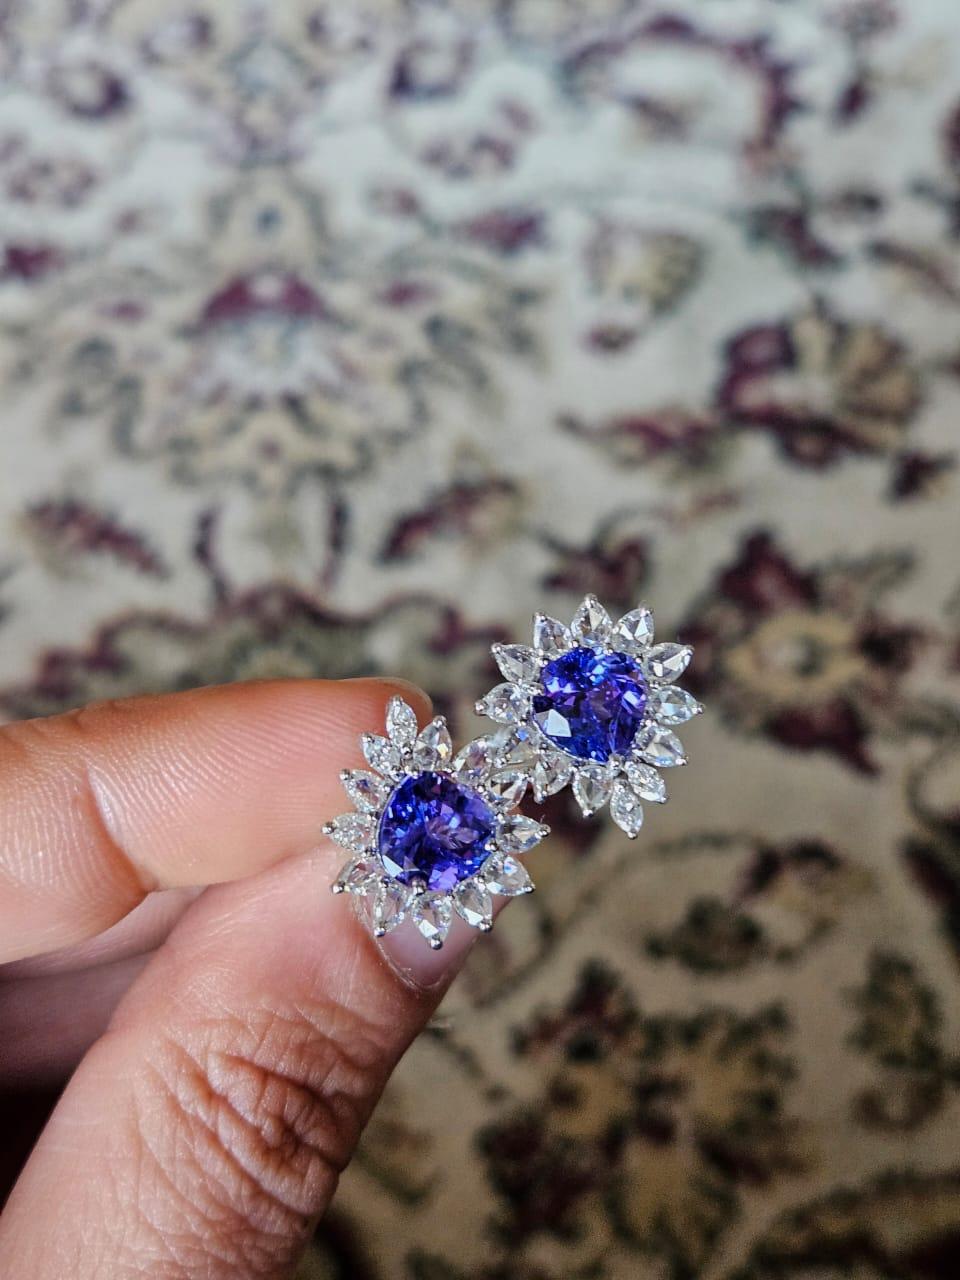 A very gorgeous and modern, Tanzanite Cocktail Ring set in 18K White Gold & Diamonds. The weight of the Tanzanites is 3.86 carats. The Tanzanites are responsibly sourced from Tanzania. The Rose Cut Diamonds weight is 1.52 carats. Other Diamonds